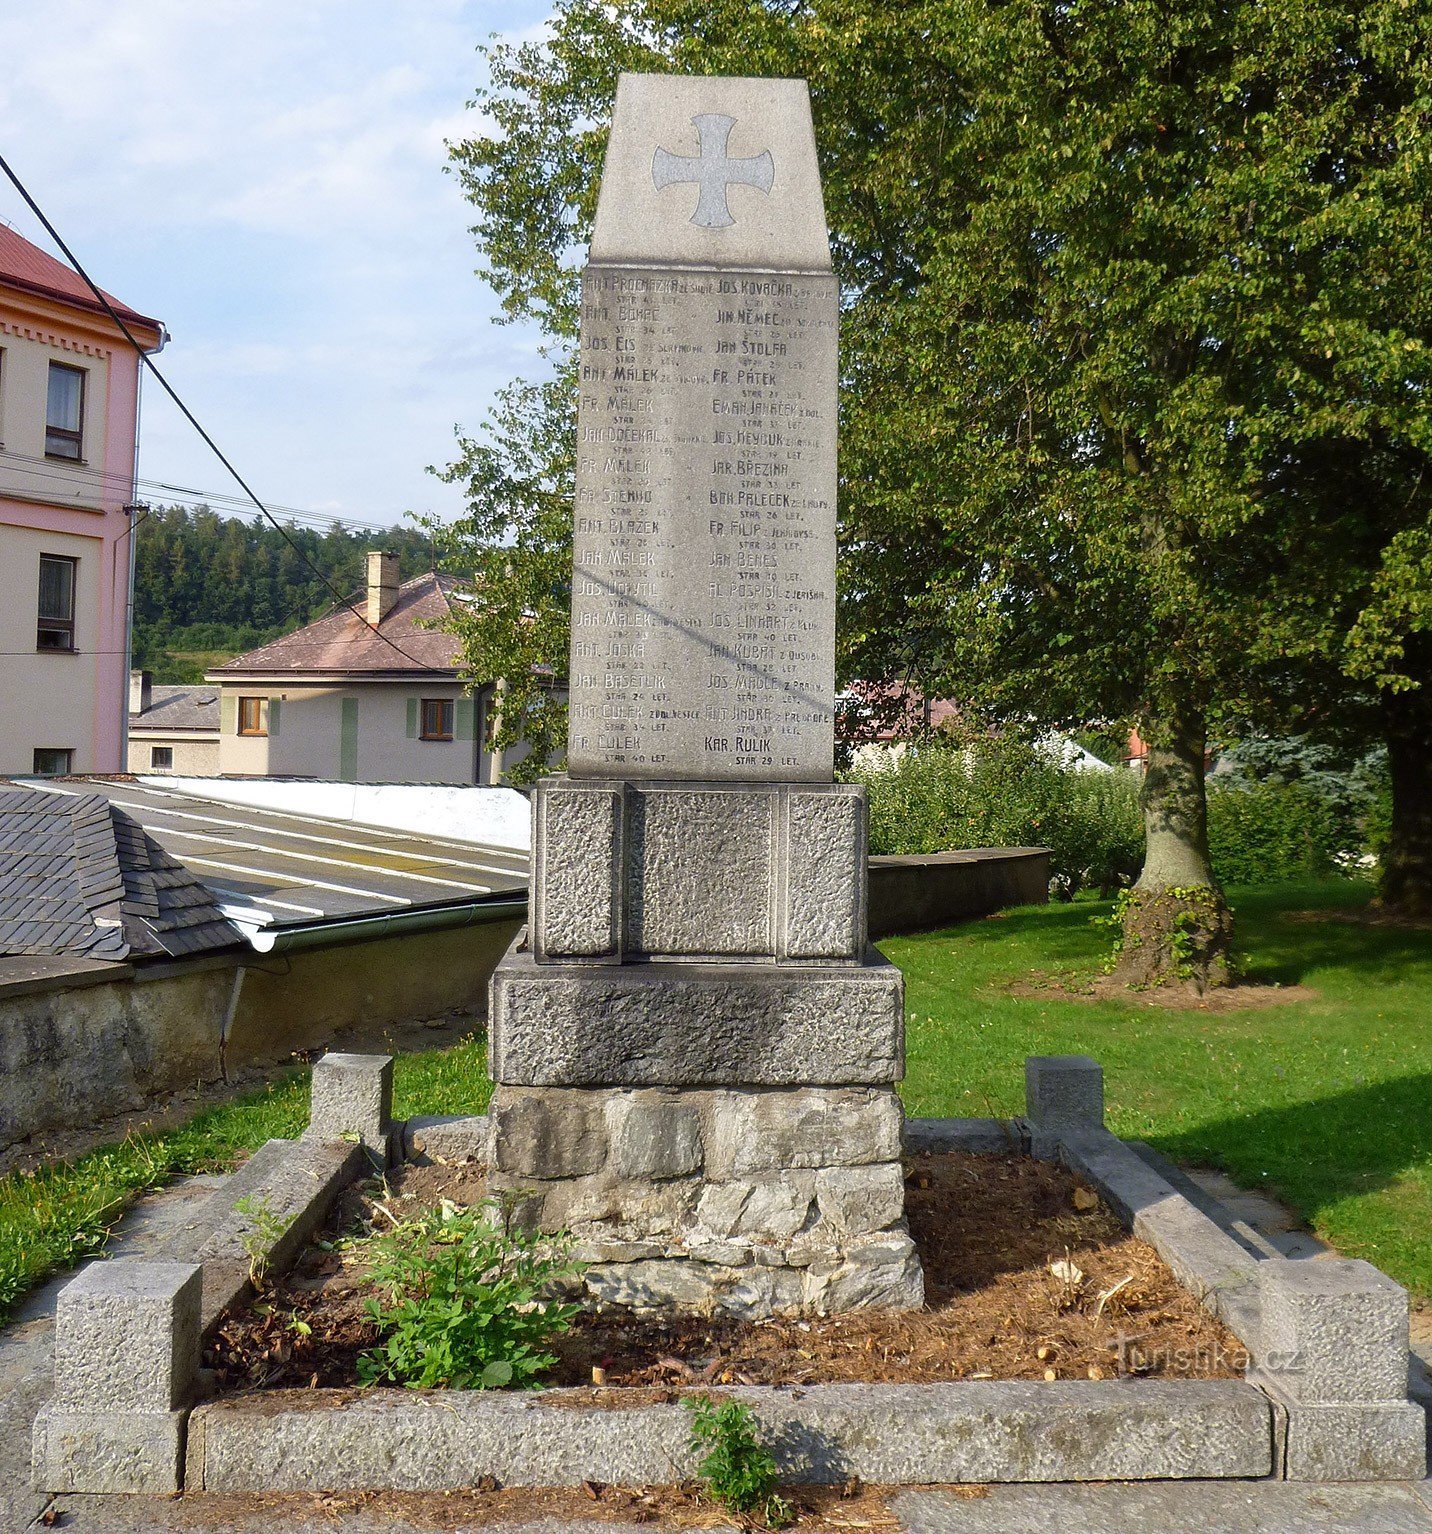 Monument to those who died in the First World War